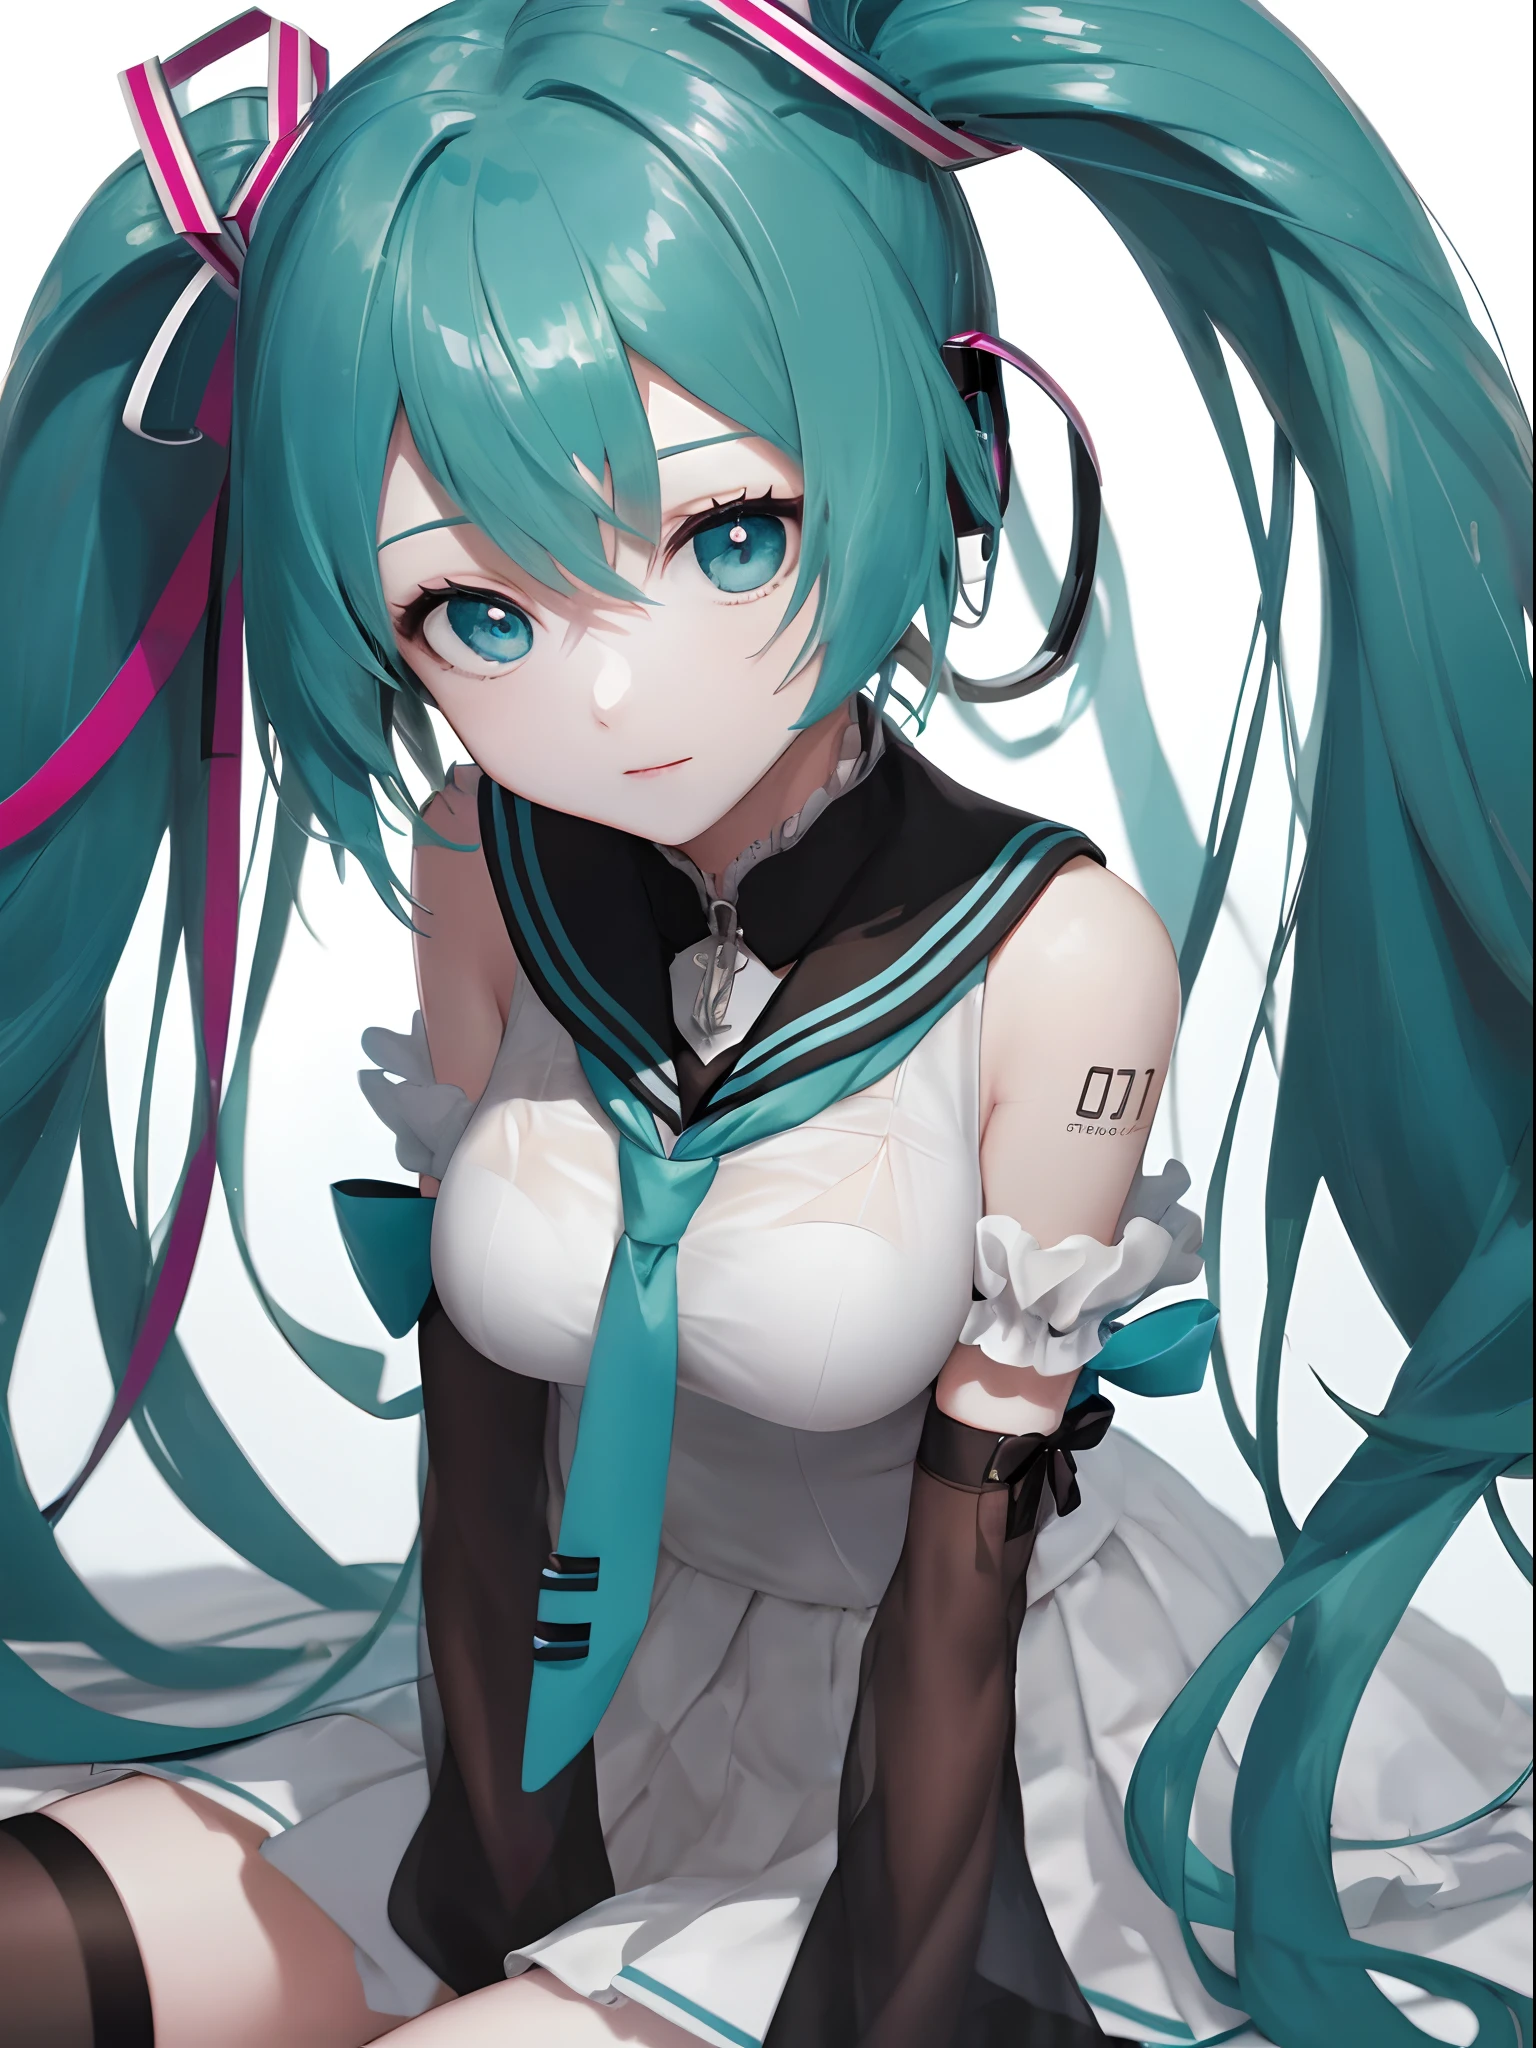 (One lady)、(​masterpiece)、(best qualtiy)、(ultra-detailliert)、(a high chroma)、(CG Illustration)、highcontrast、low angles、VOCALOID、((miku hatsune))、(Fine and beautiful eyes)、Delicate beautiful face、Ram hairstyle、((dishevled hair))、(( a sailor suit))、See-through shirt、(Black stockings)、(B cup breasts)、((teats)) 、The best lighting、Float inside、simple background